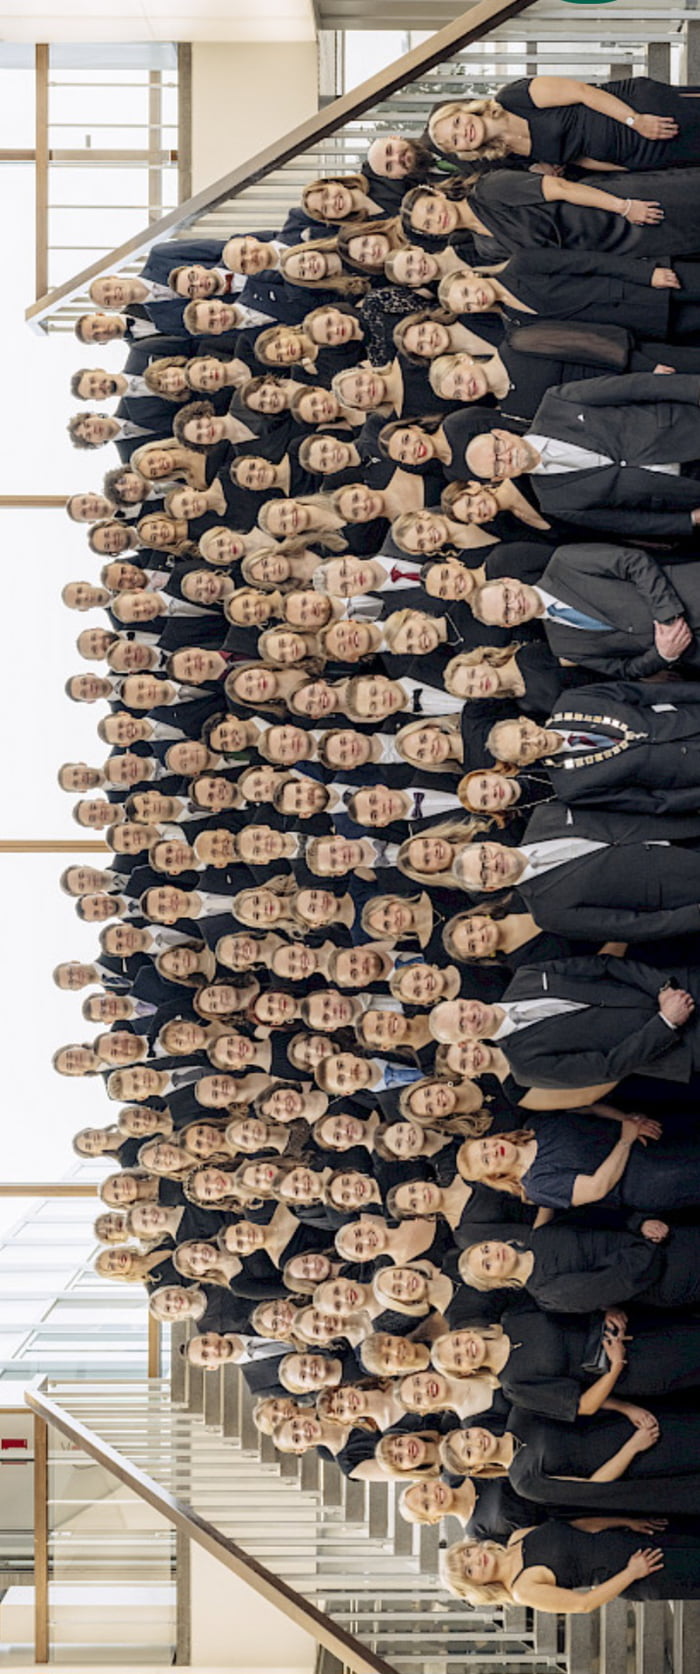 A group of newly graduated REAL doctors from Finland